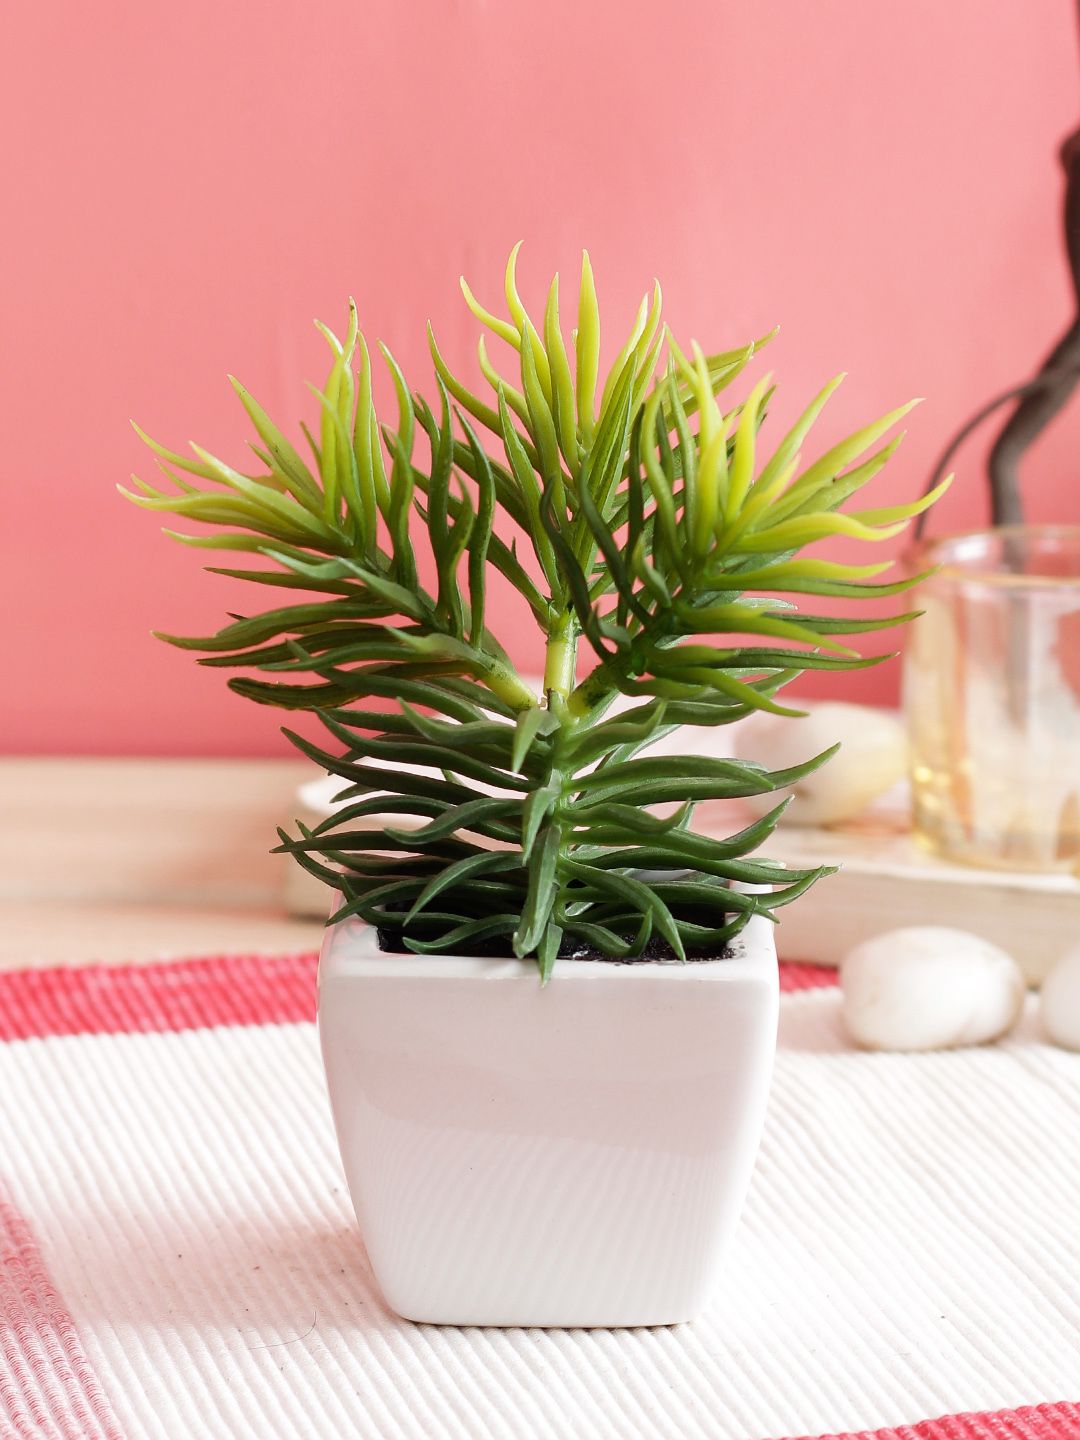 PolliNation Green Artificial Succulent Plant With White Ceramic Pot Price in India